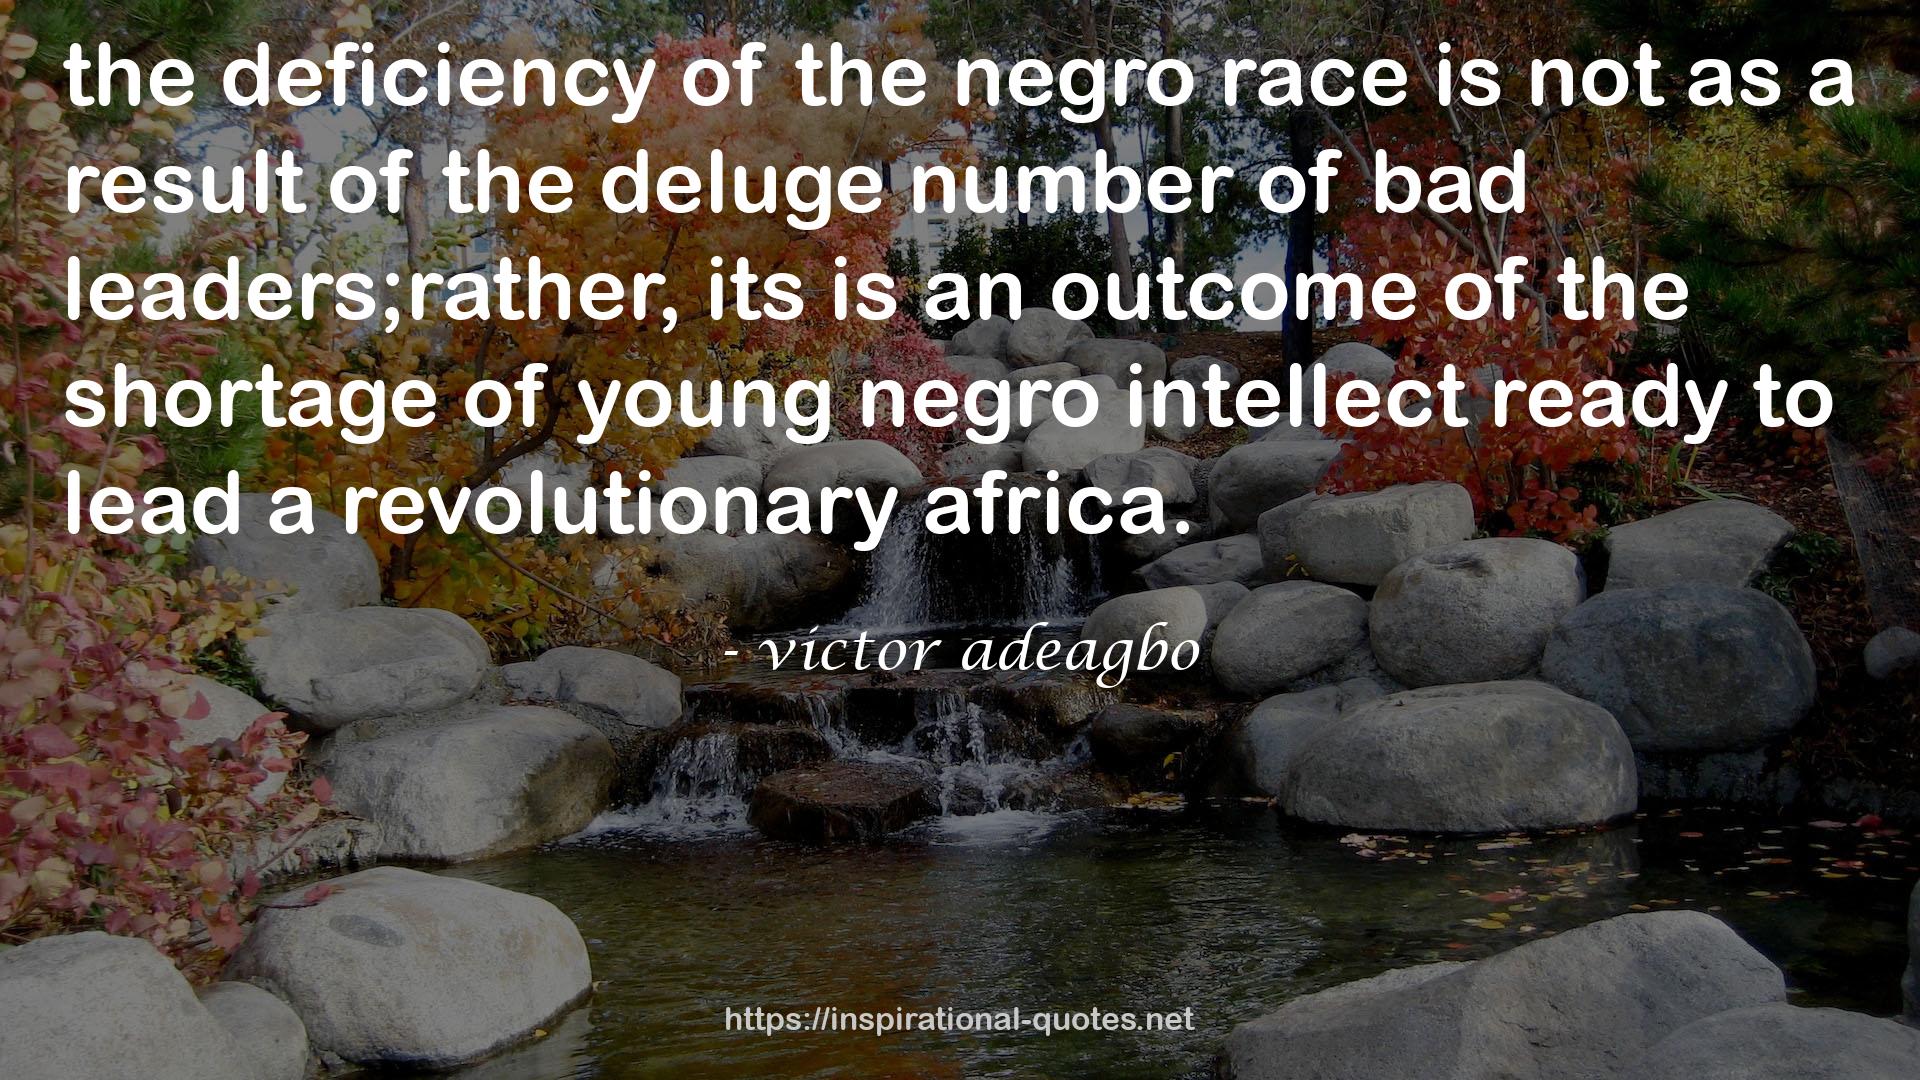 victor adeagbo QUOTES